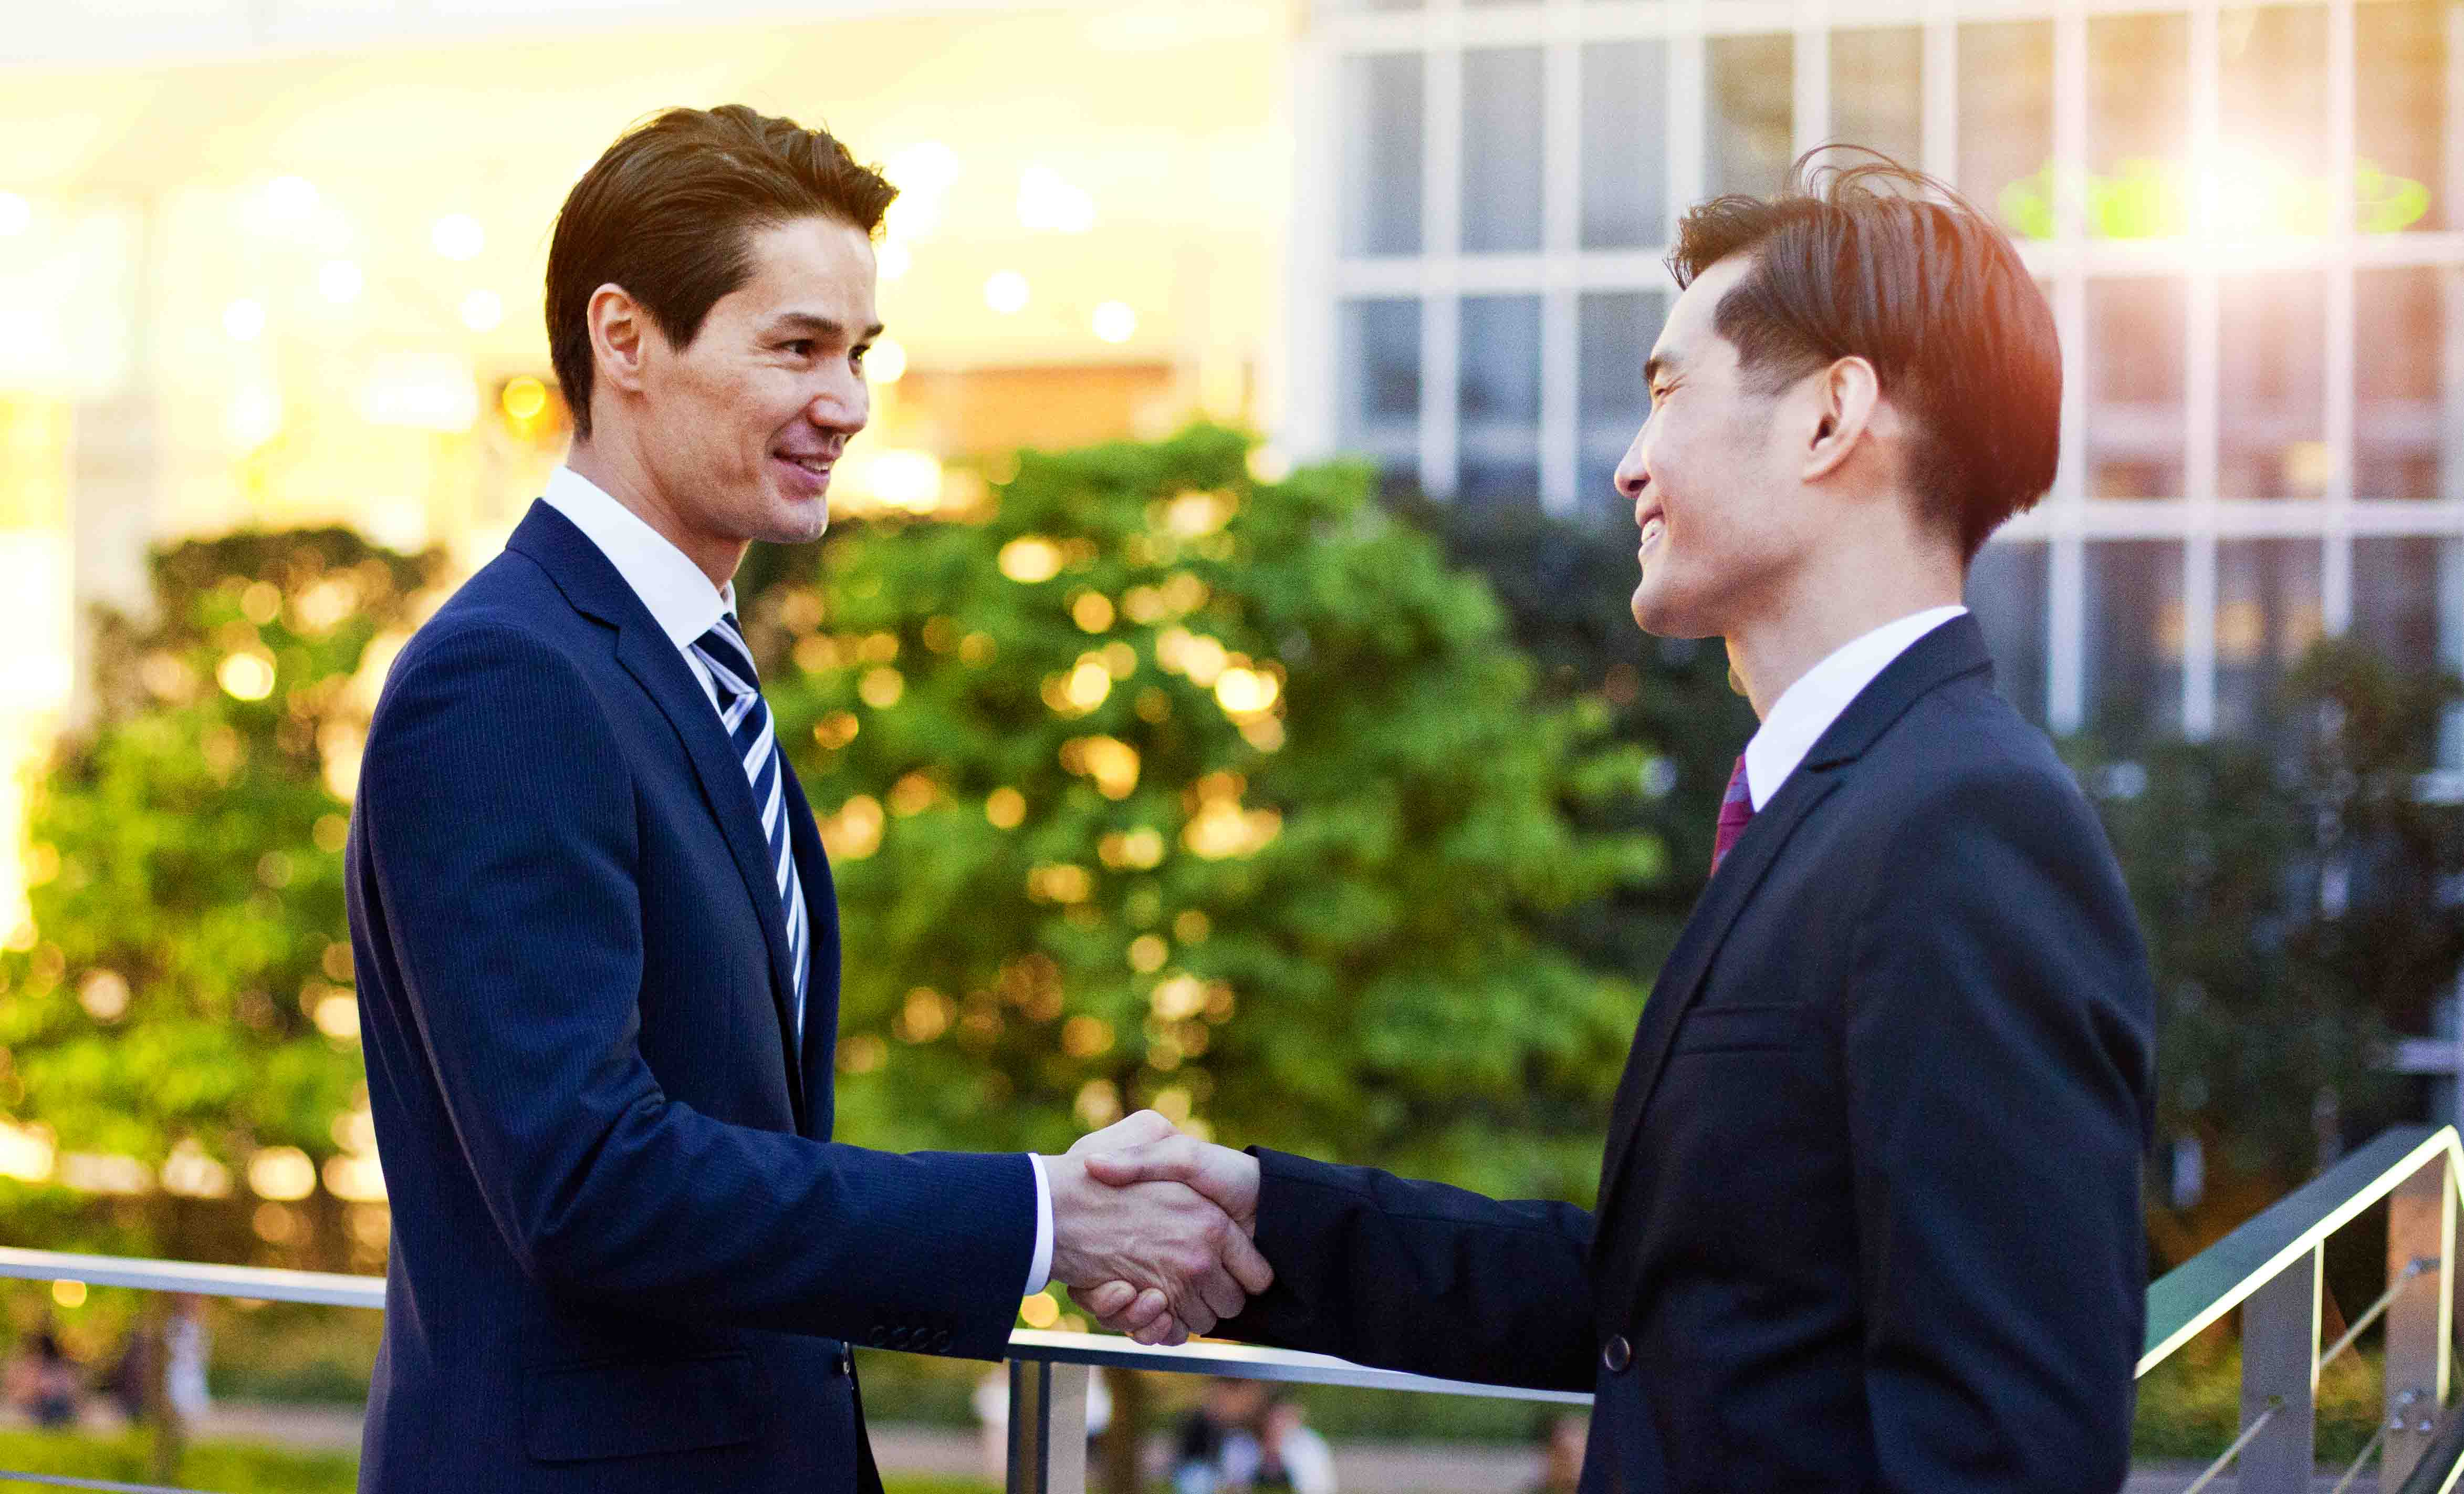 Two business men shaking hands with each other